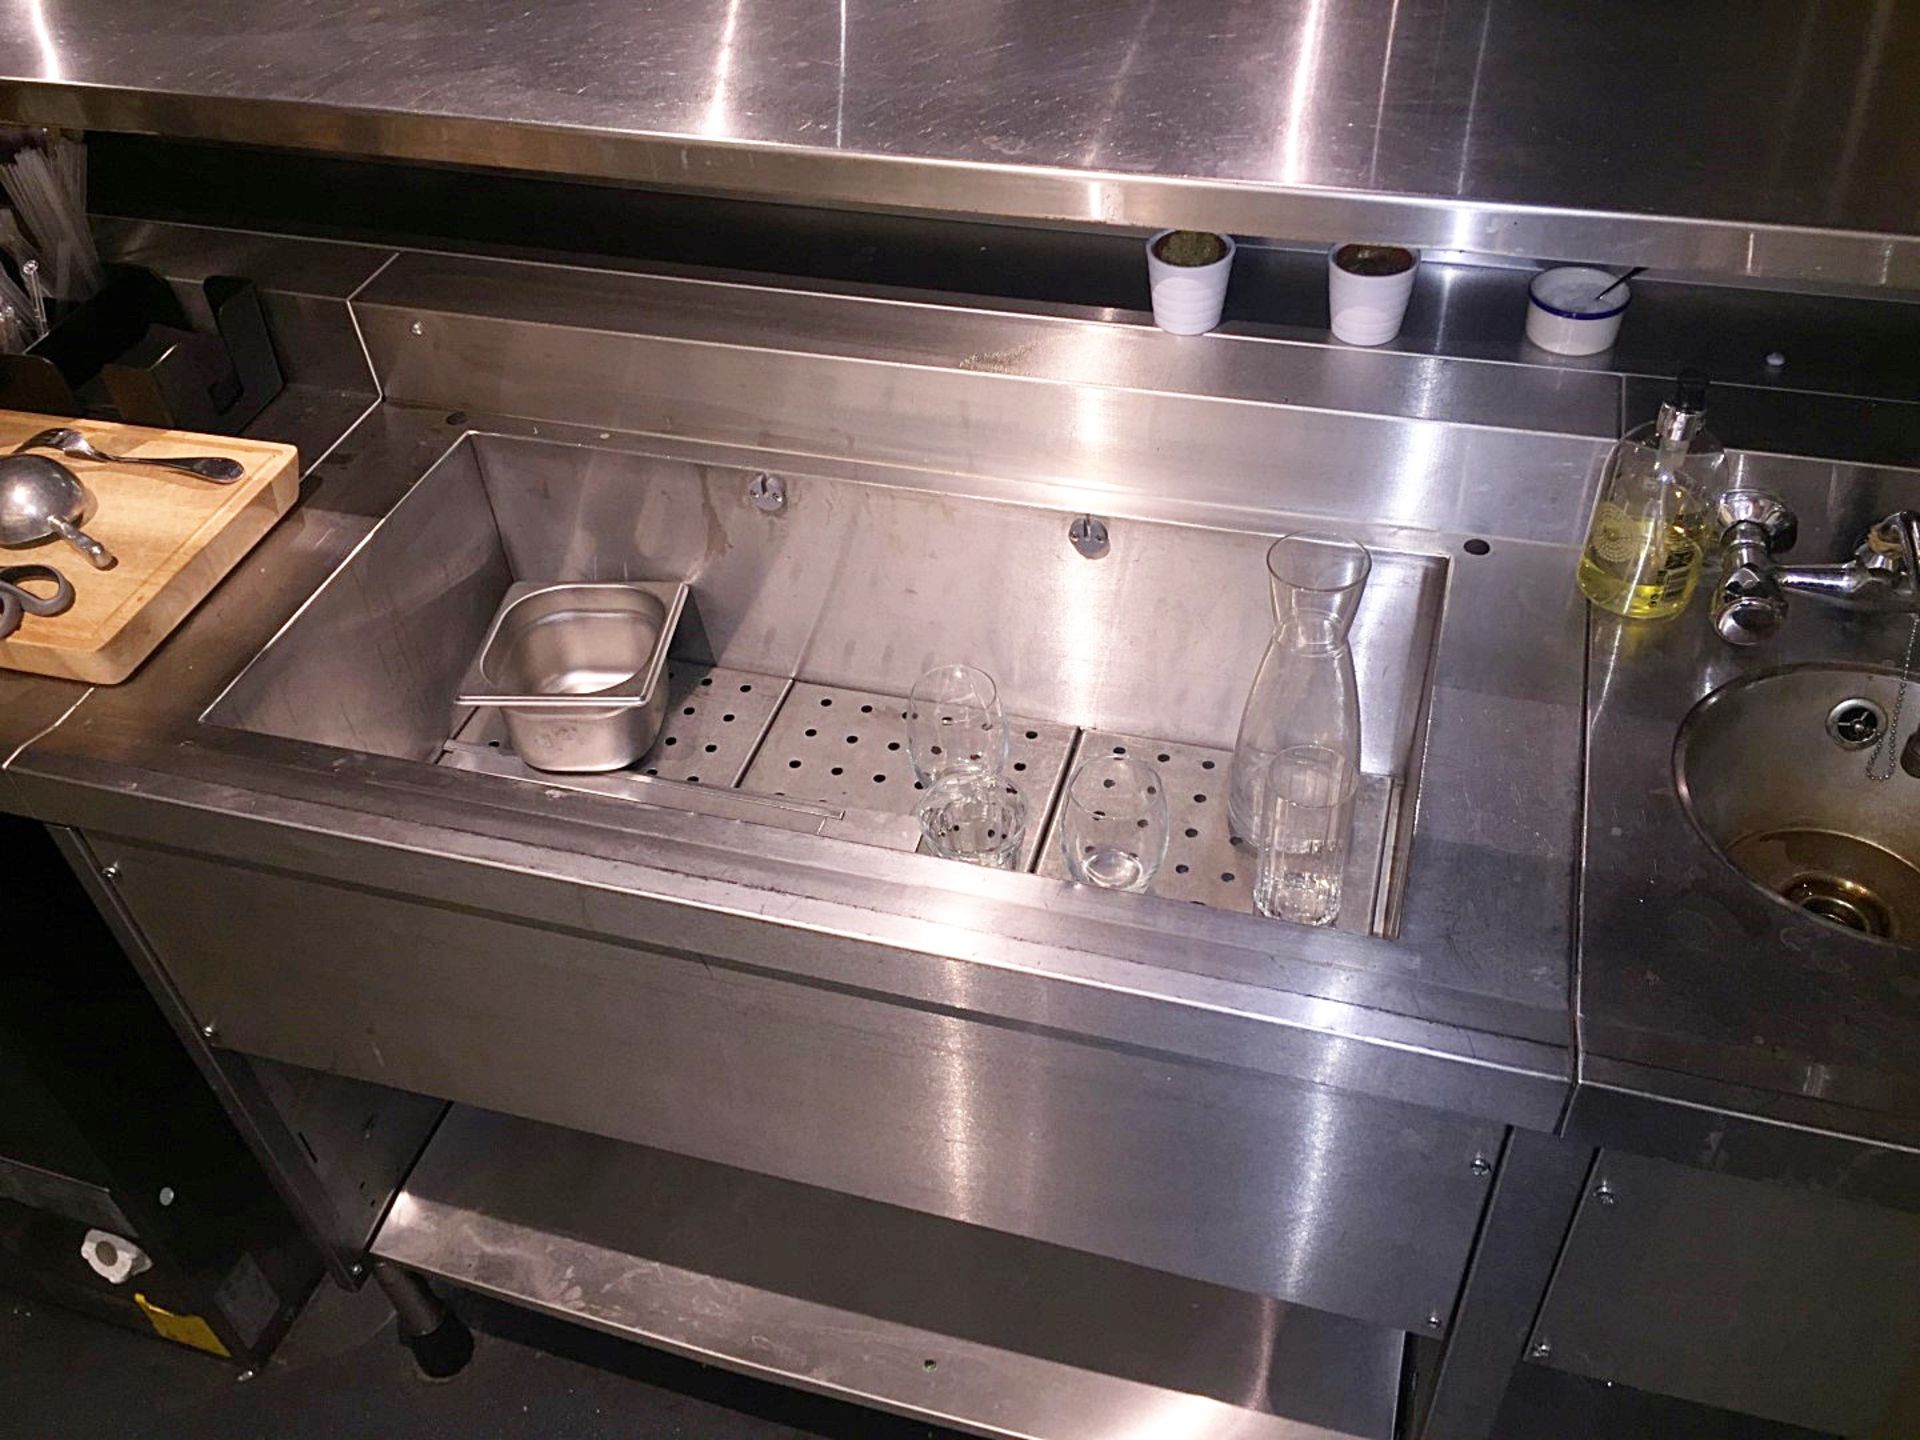 1 x Stainless Steel Commercial Wash Station Area - 251cm x 70 x H92- Dimensions: - Ref: WS/GF031 - O - Image 4 of 4